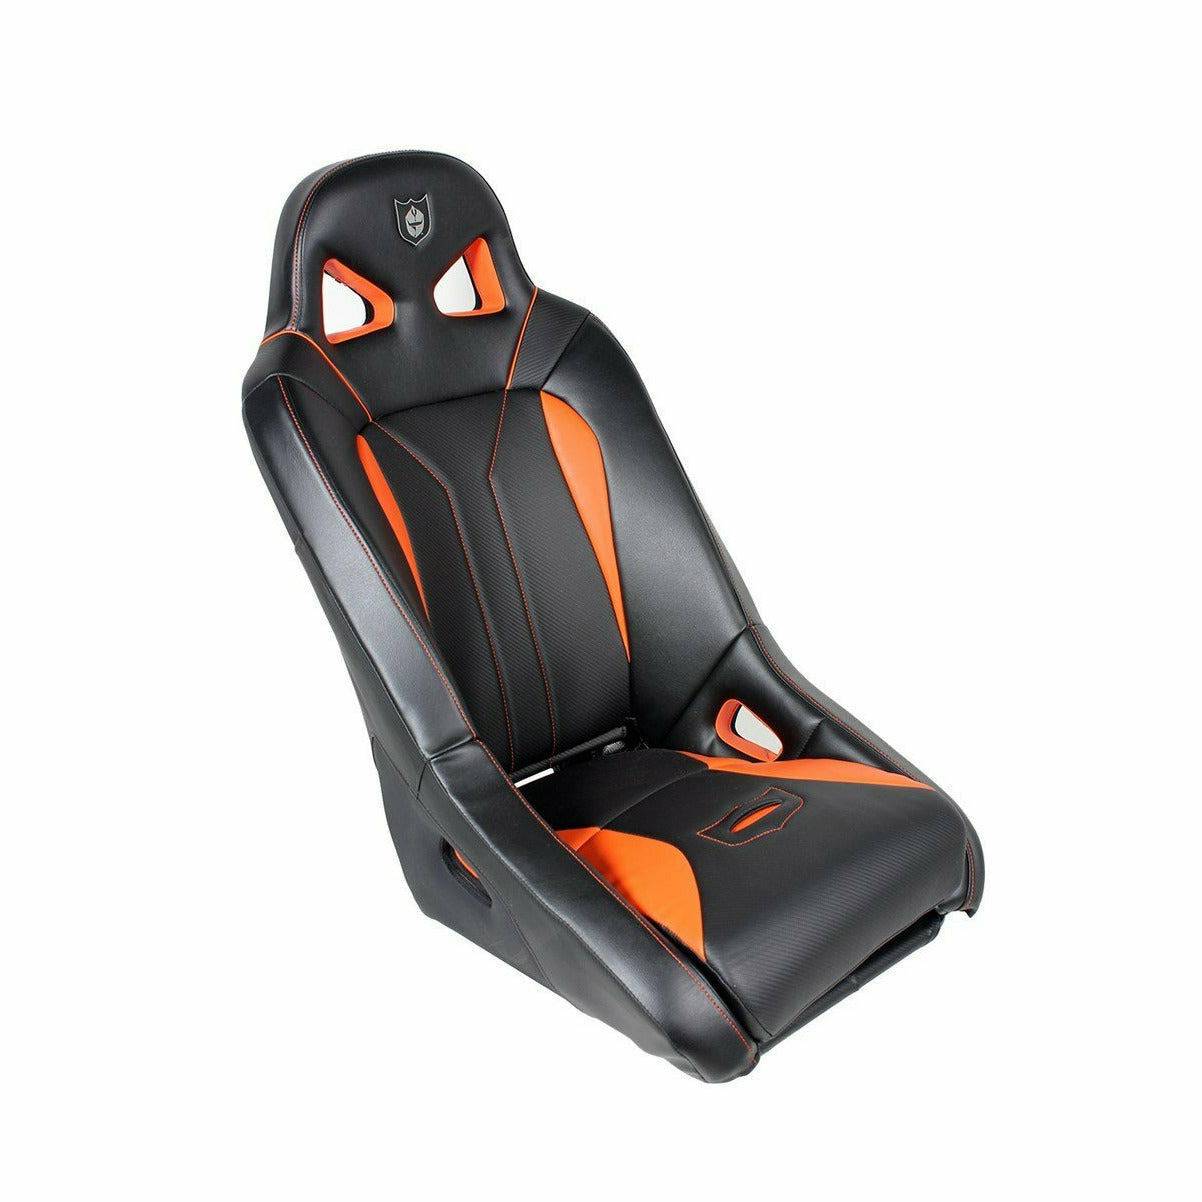 Pro Armor G2 Front Seat